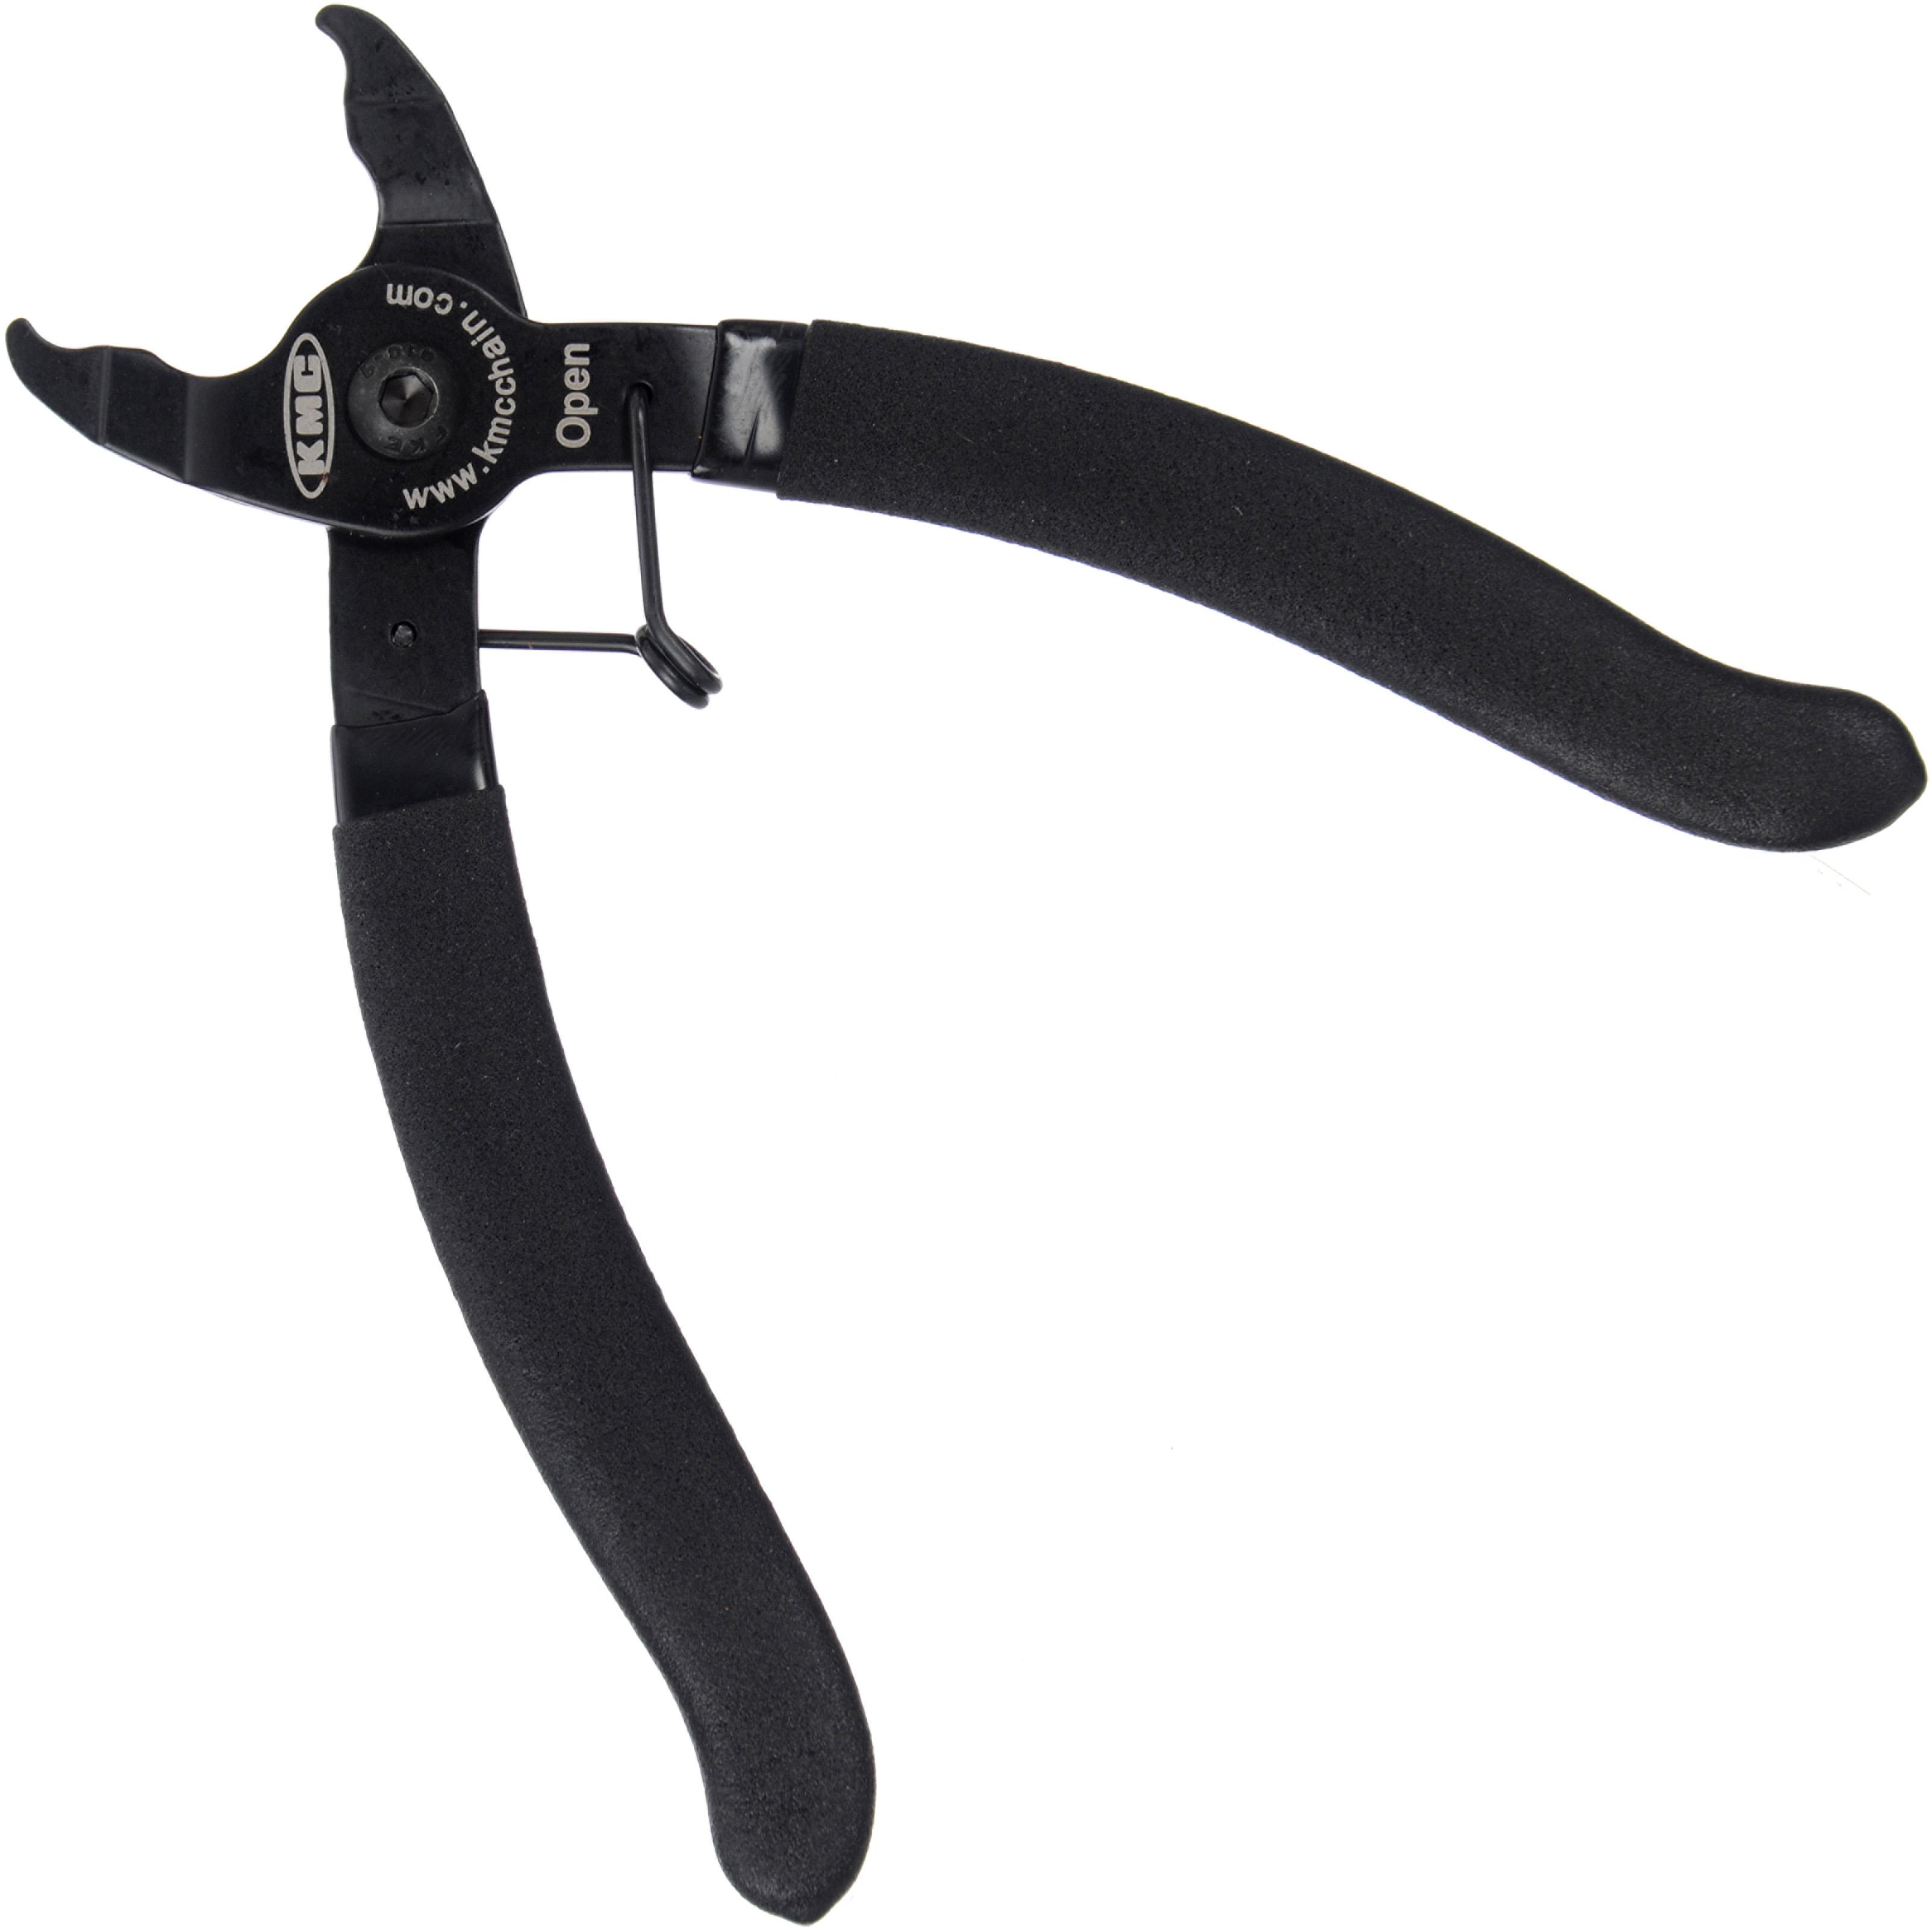 Kmc Missing Link Remover Pliers - Black